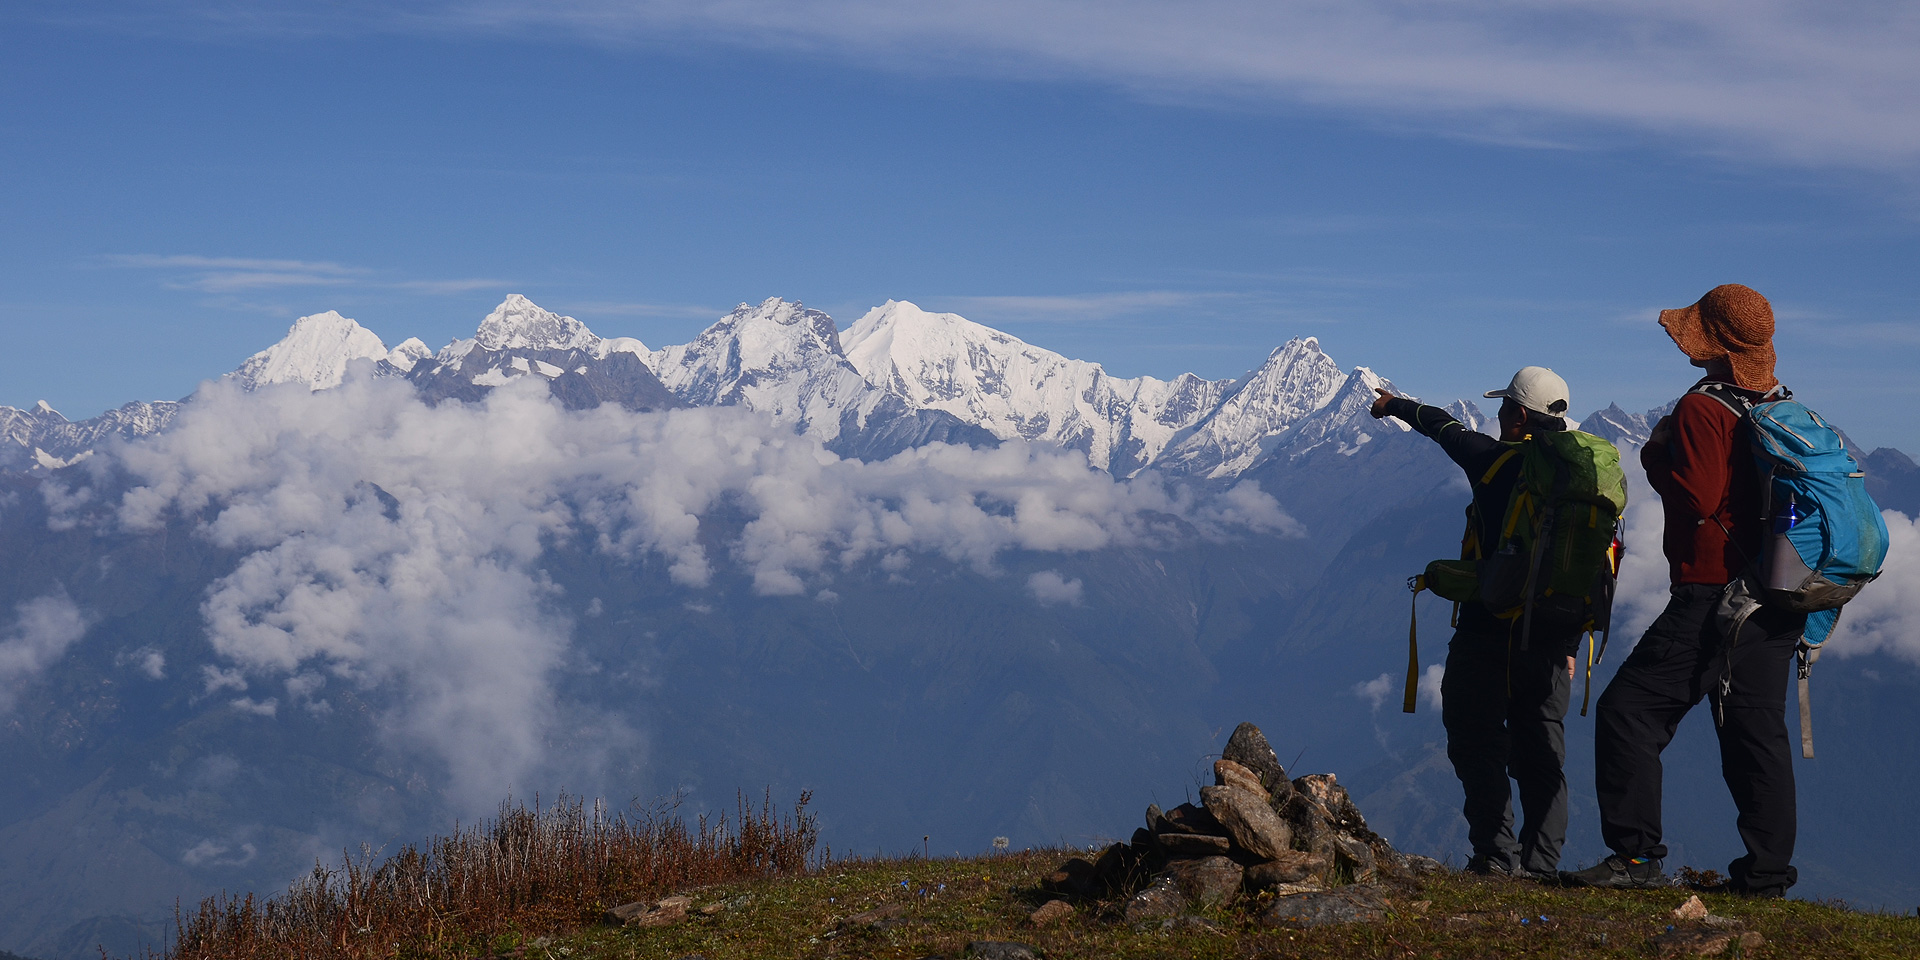 View to Ganesh Himal from Laurabina on the Gosainkunda trail in Nepal